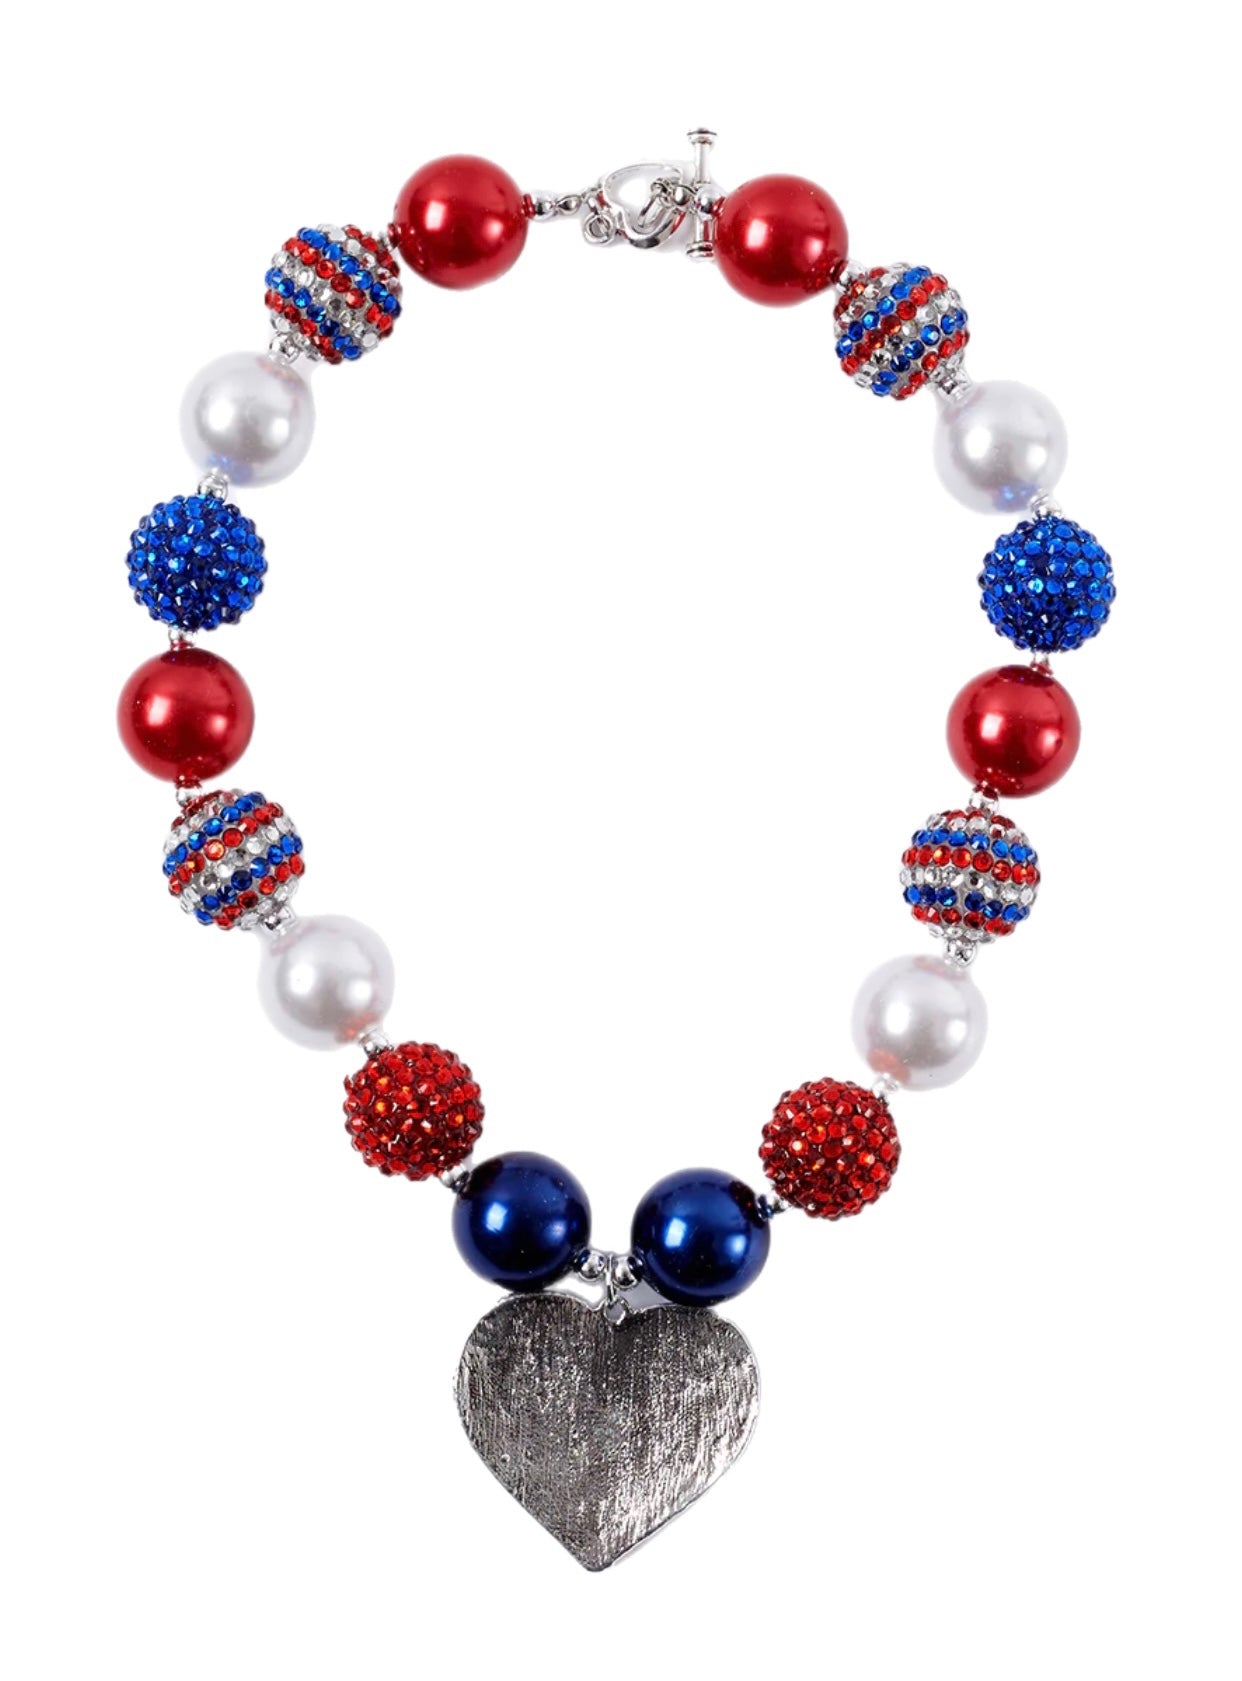 Girls Patriotic Heart Chunky Necklace